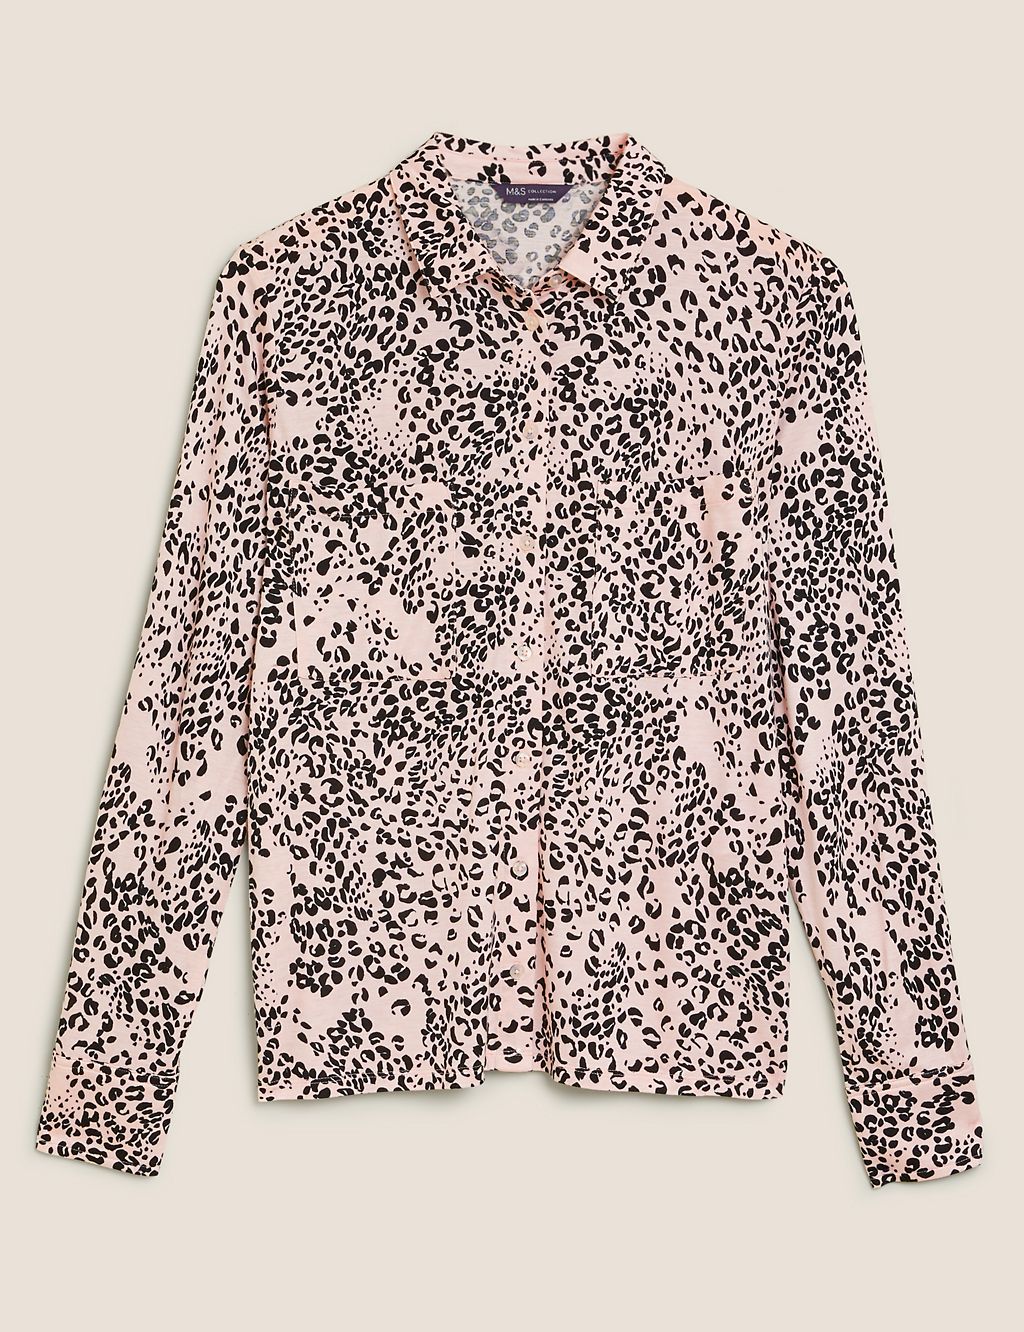 Jersey Animal Print Collared Top 1 of 6